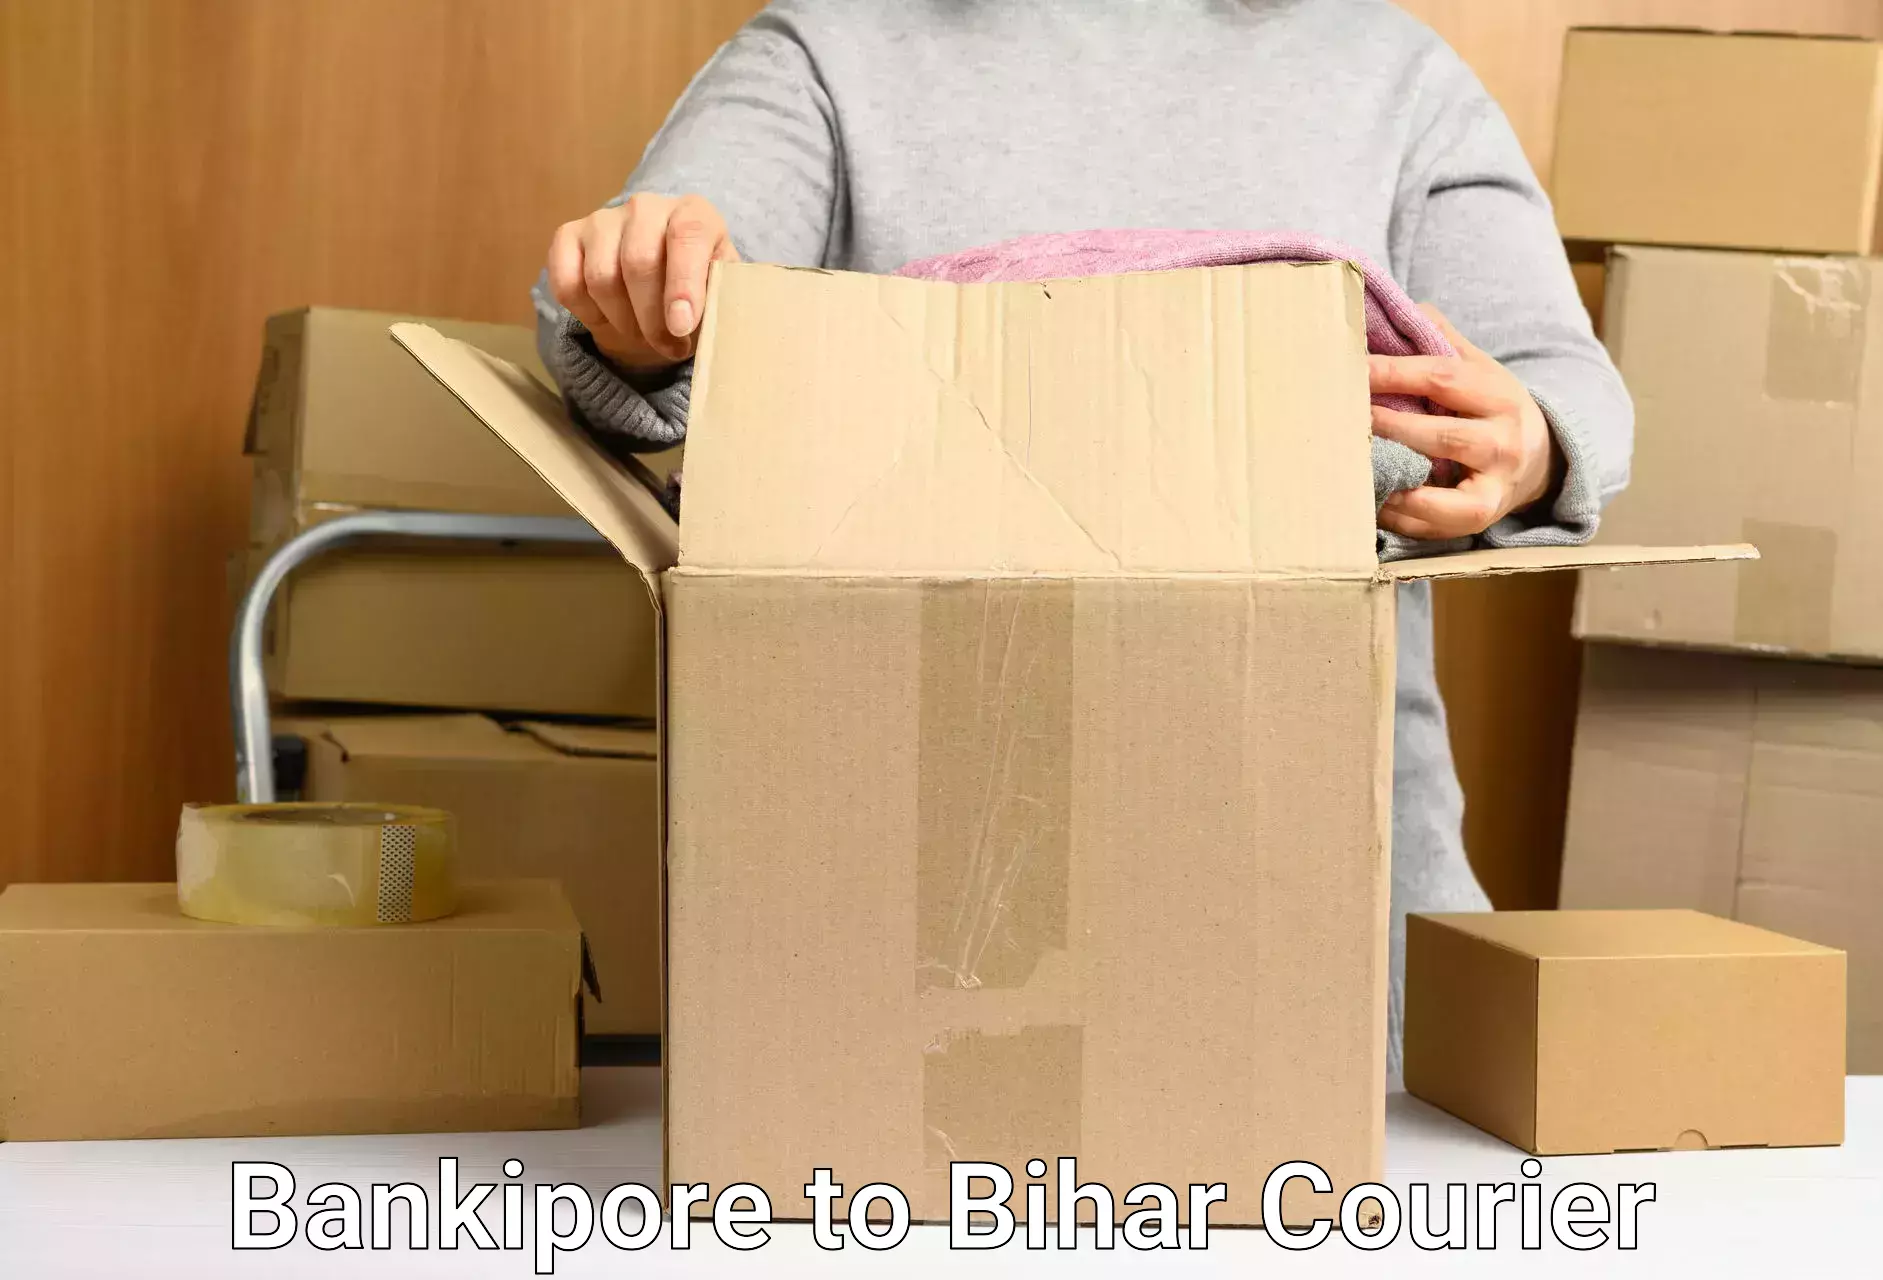 Global freight services Bankipore to Patna